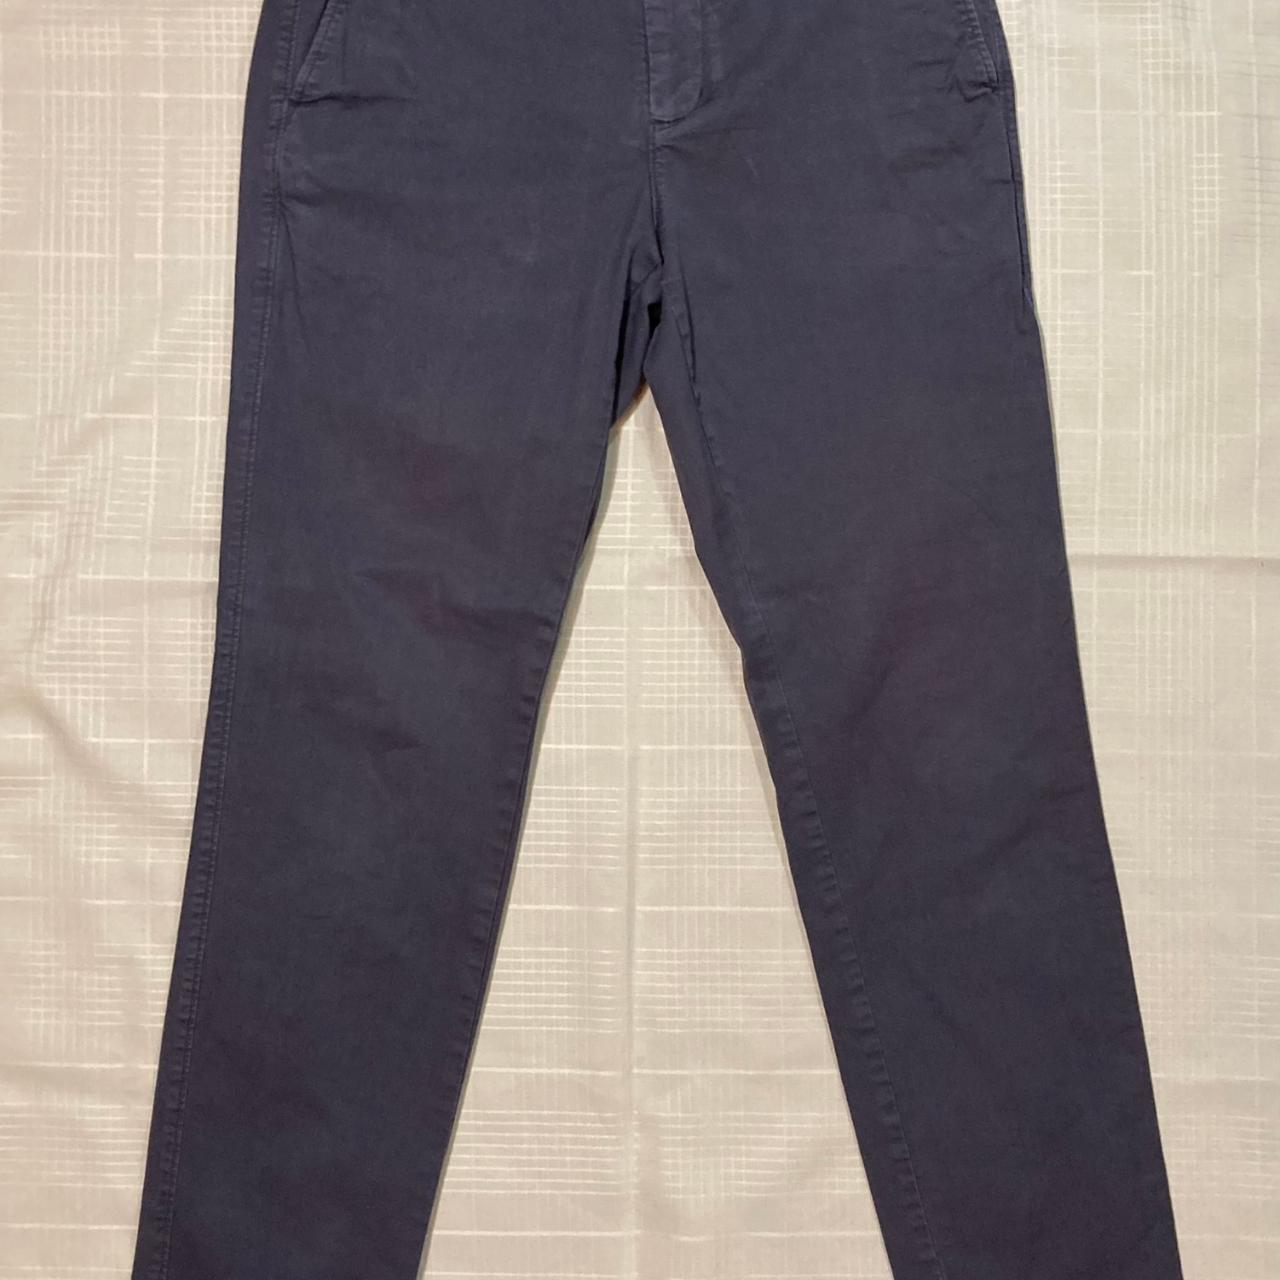 Everlane Men's Navy and Grey Trousers | Depop